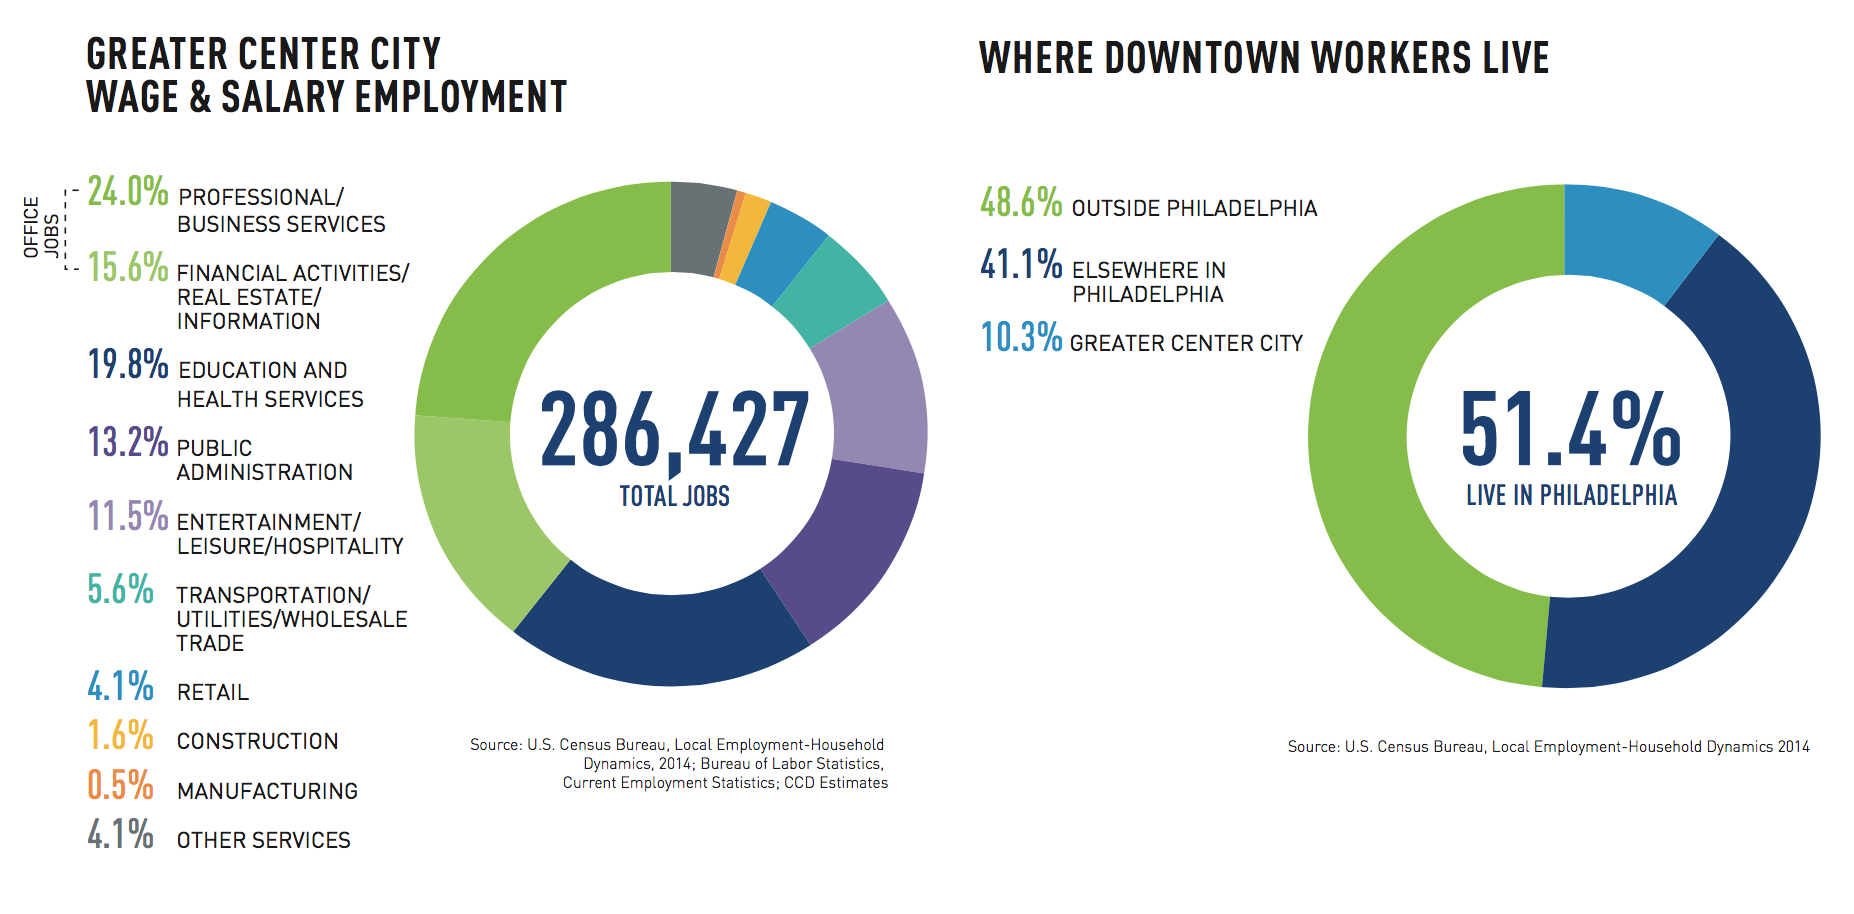 Greater Center City wage and salary employment